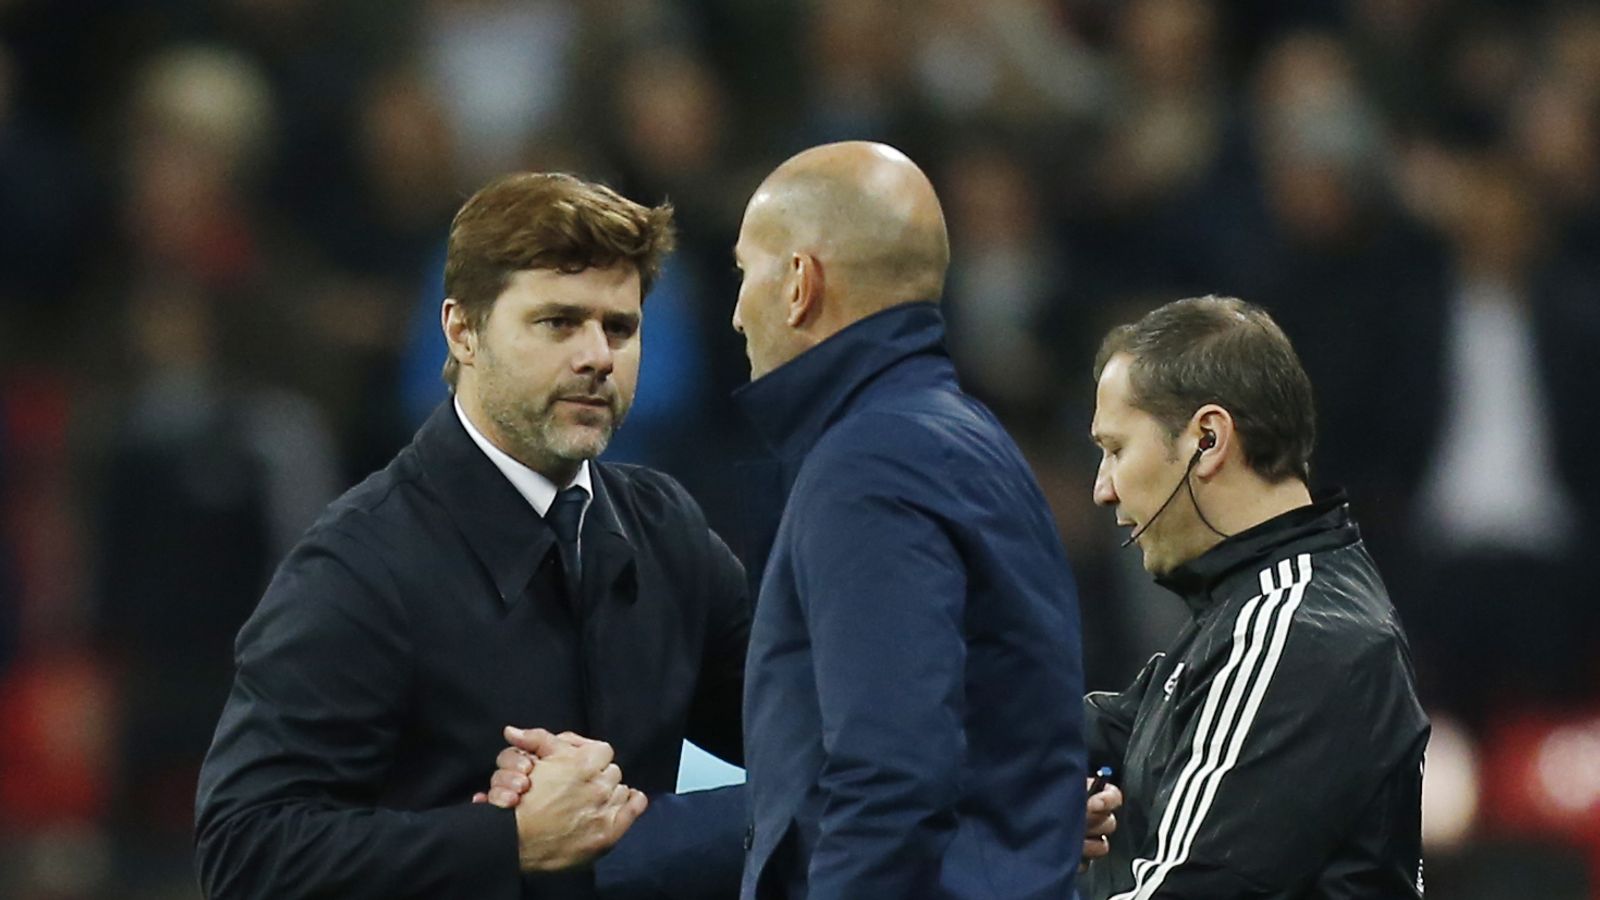 Pochettino gets pelters for sticking Zidane and Beckham at wing